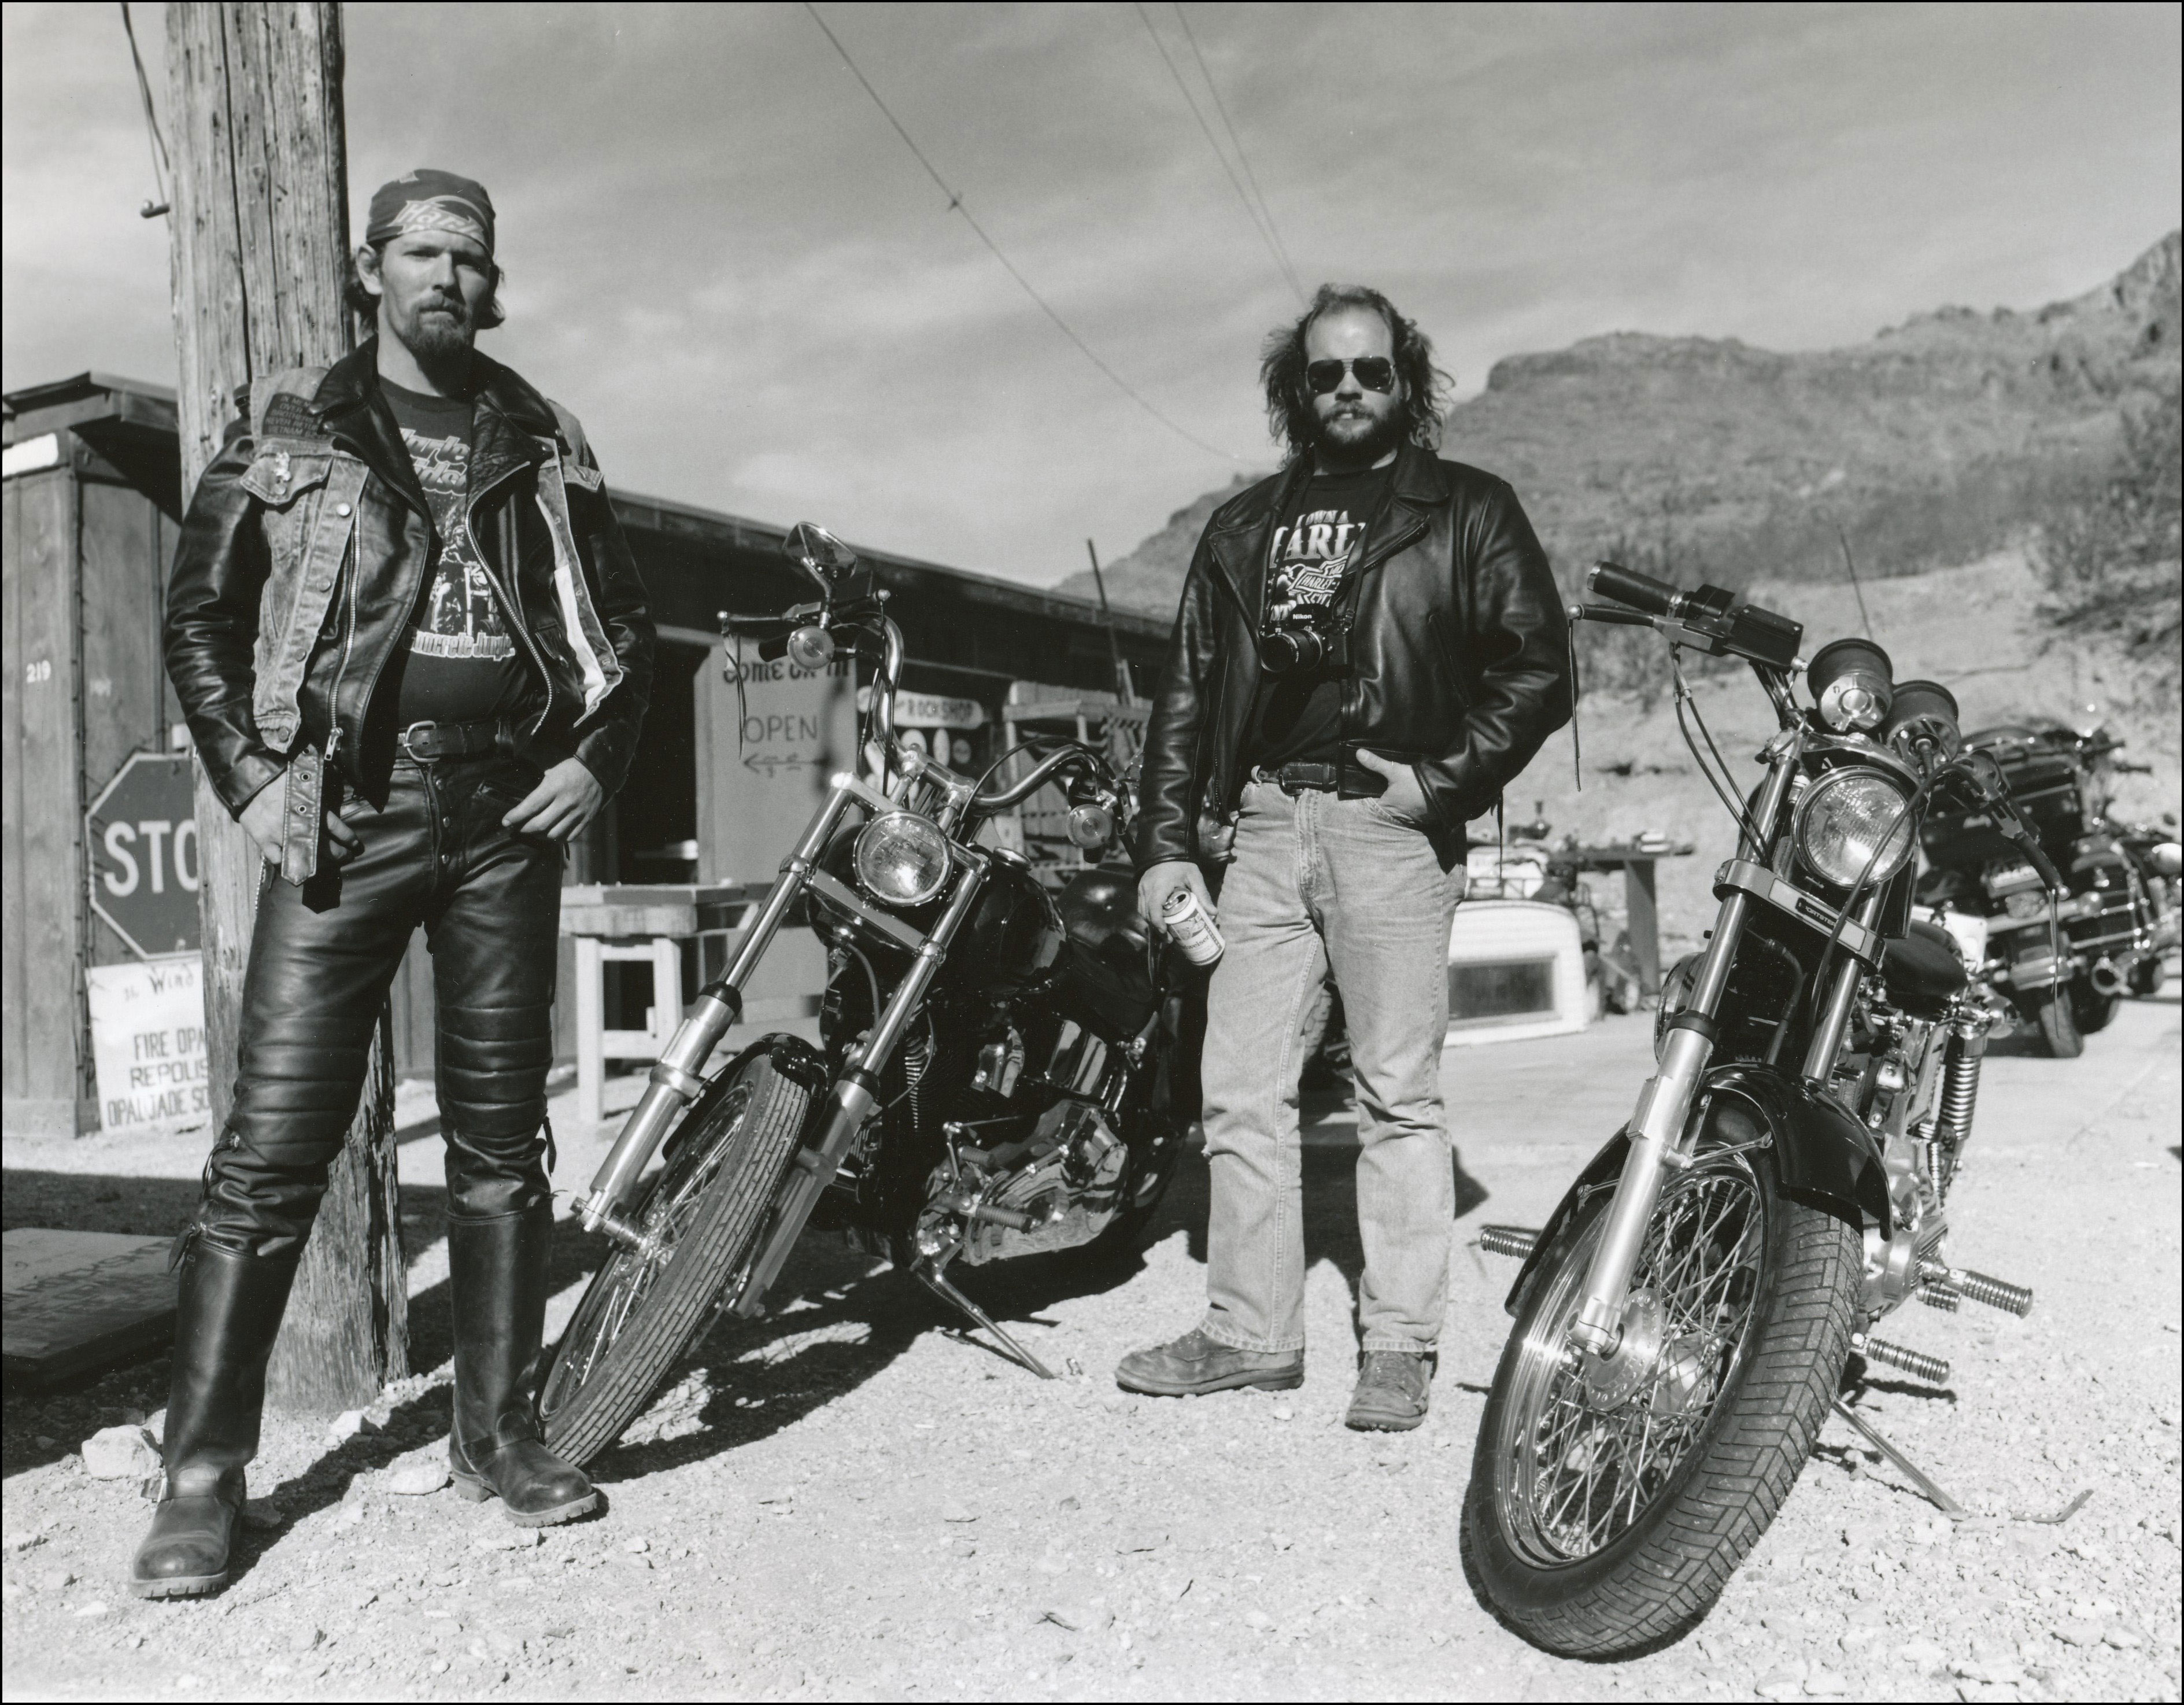 Motorcycle riders posing with their bikes in front of a small town gas station